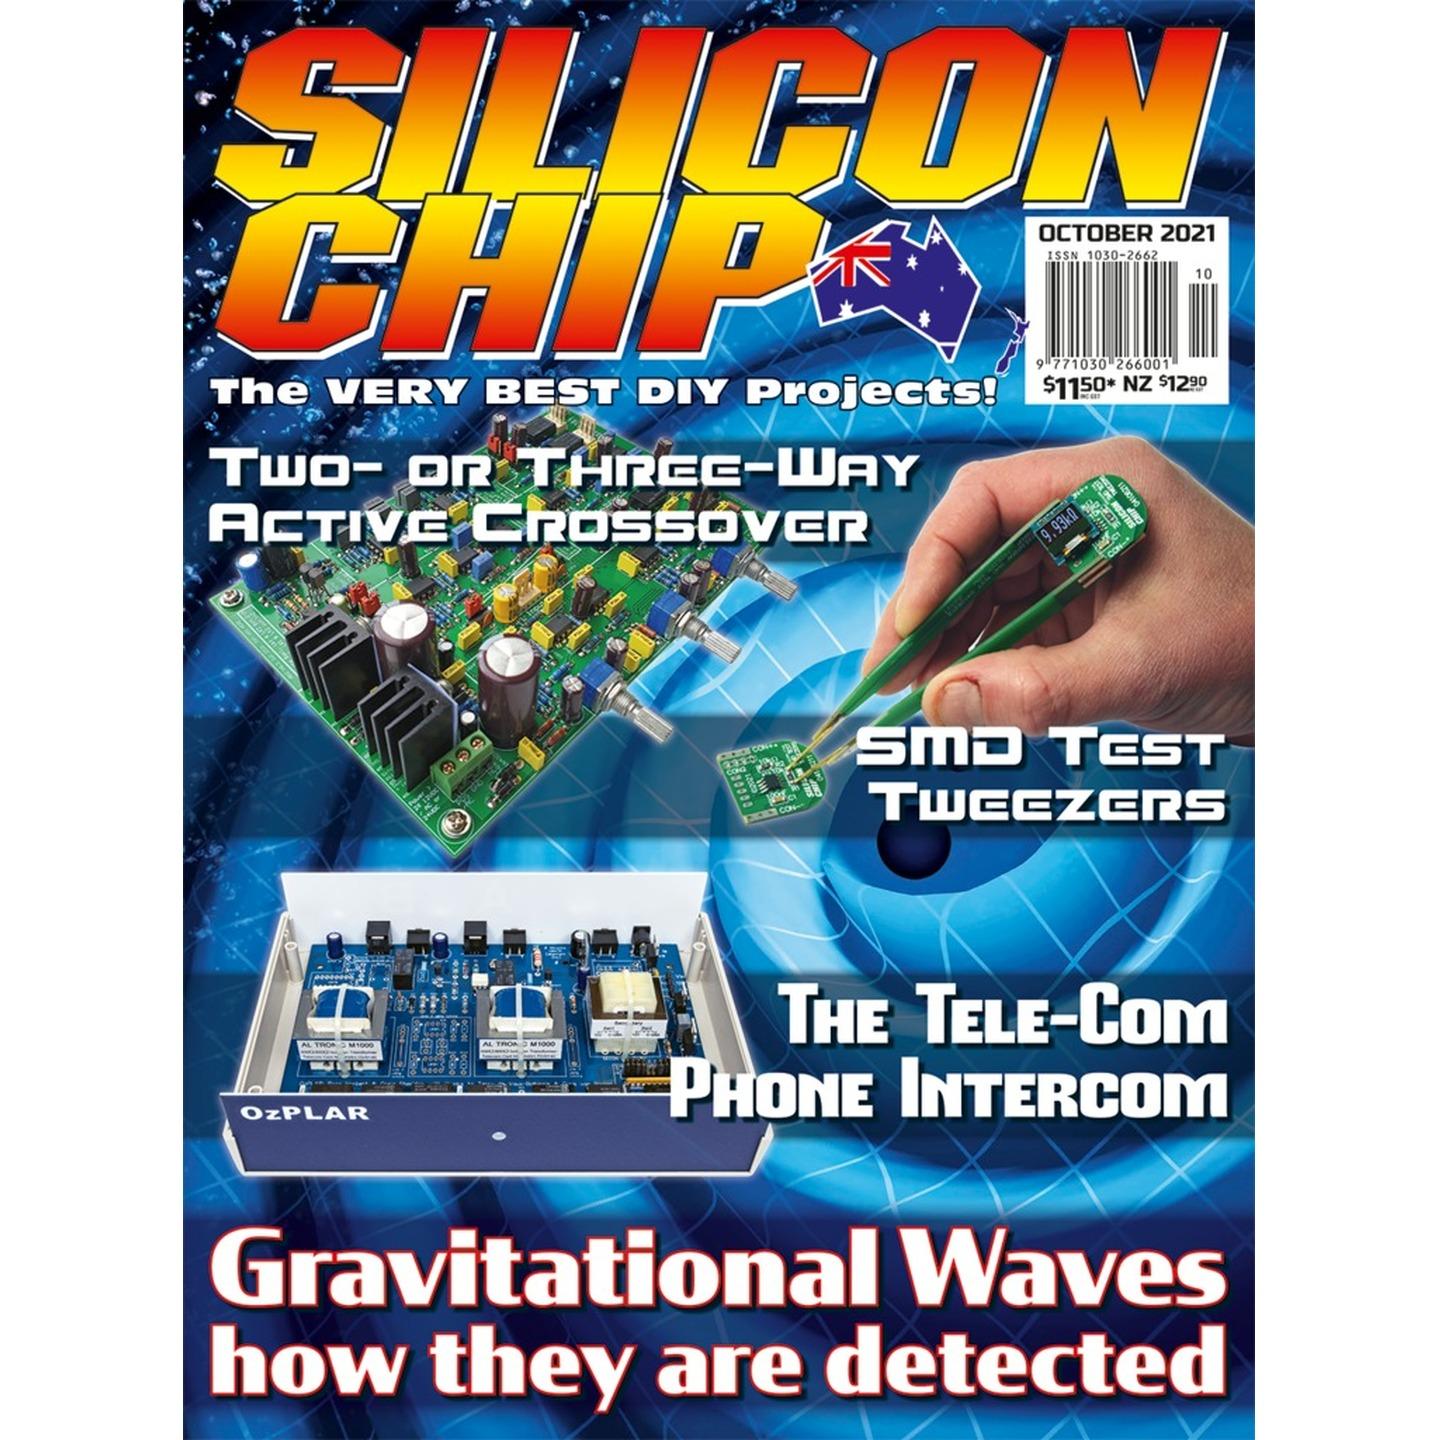 Silicon Chip Monthly Magazine